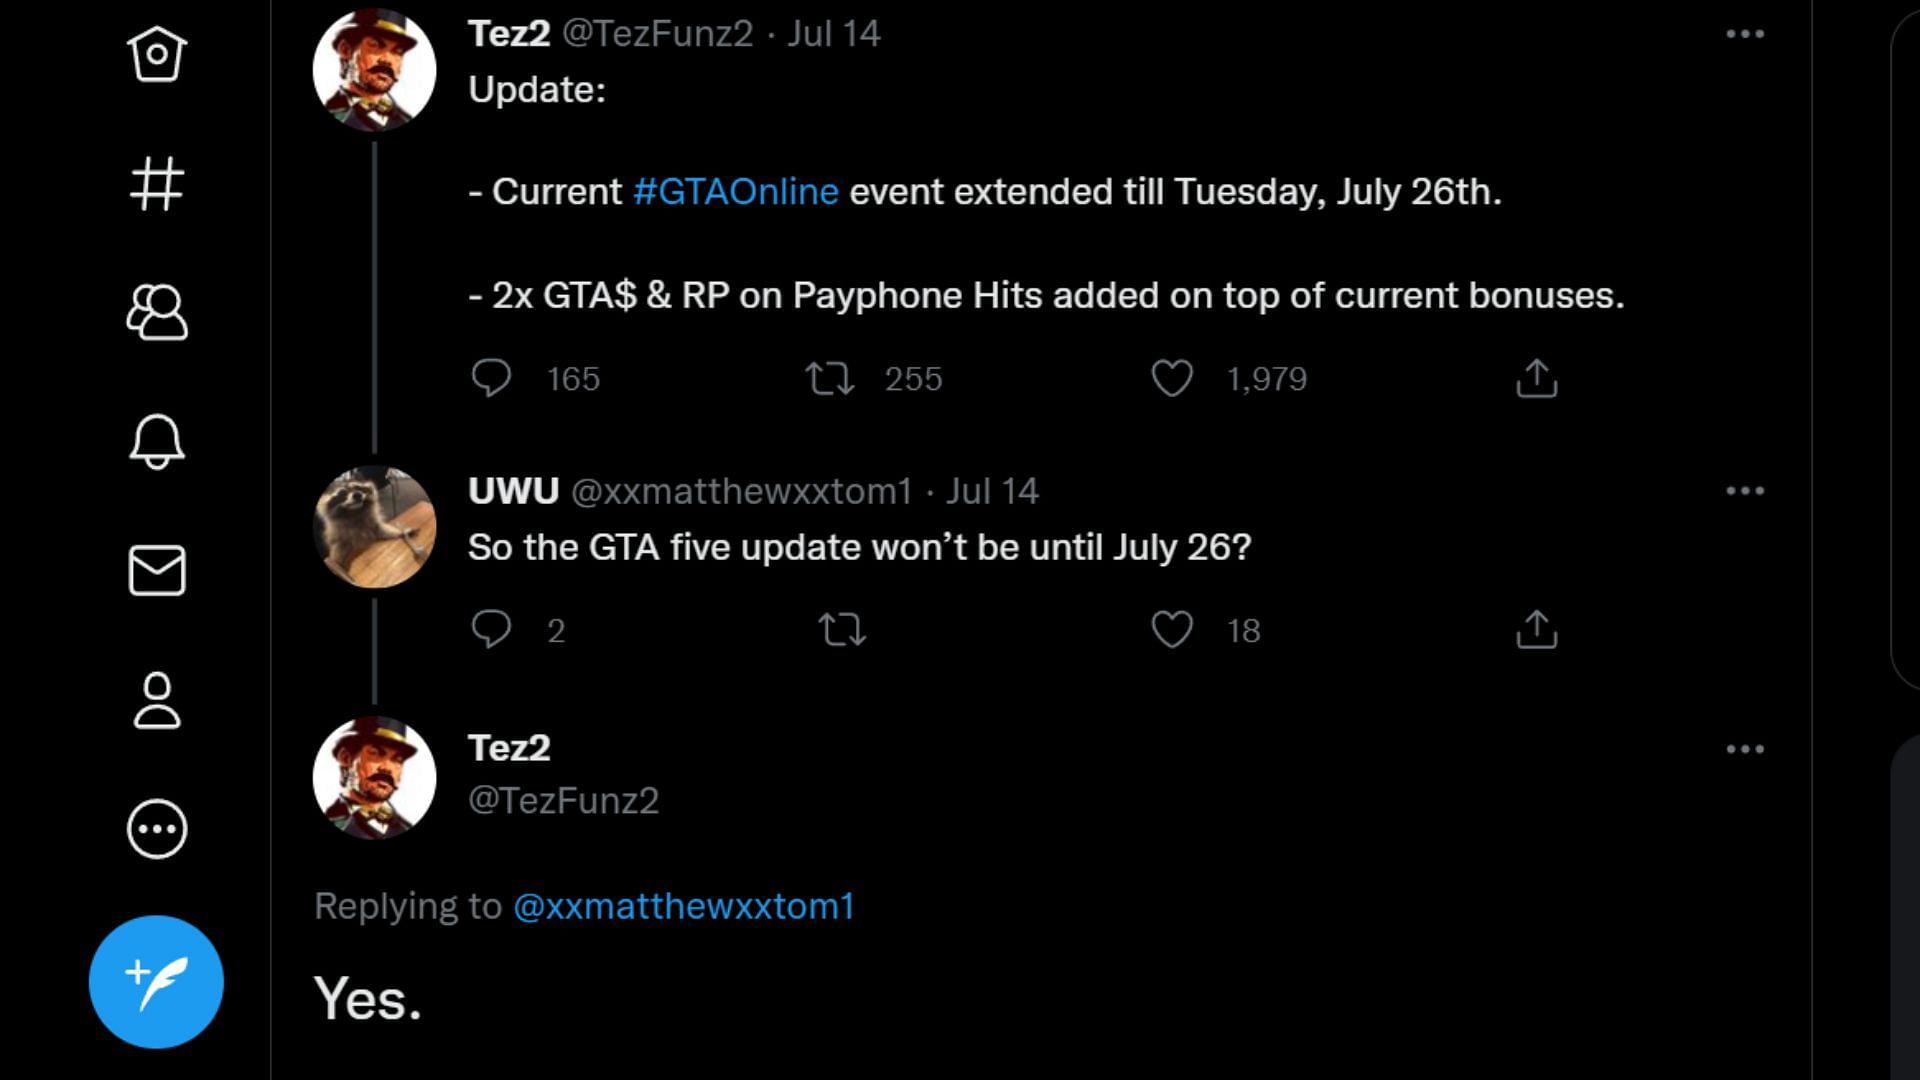 Most GTA insiders are of the same opinion (Image via @TezFunz2, Twitter)